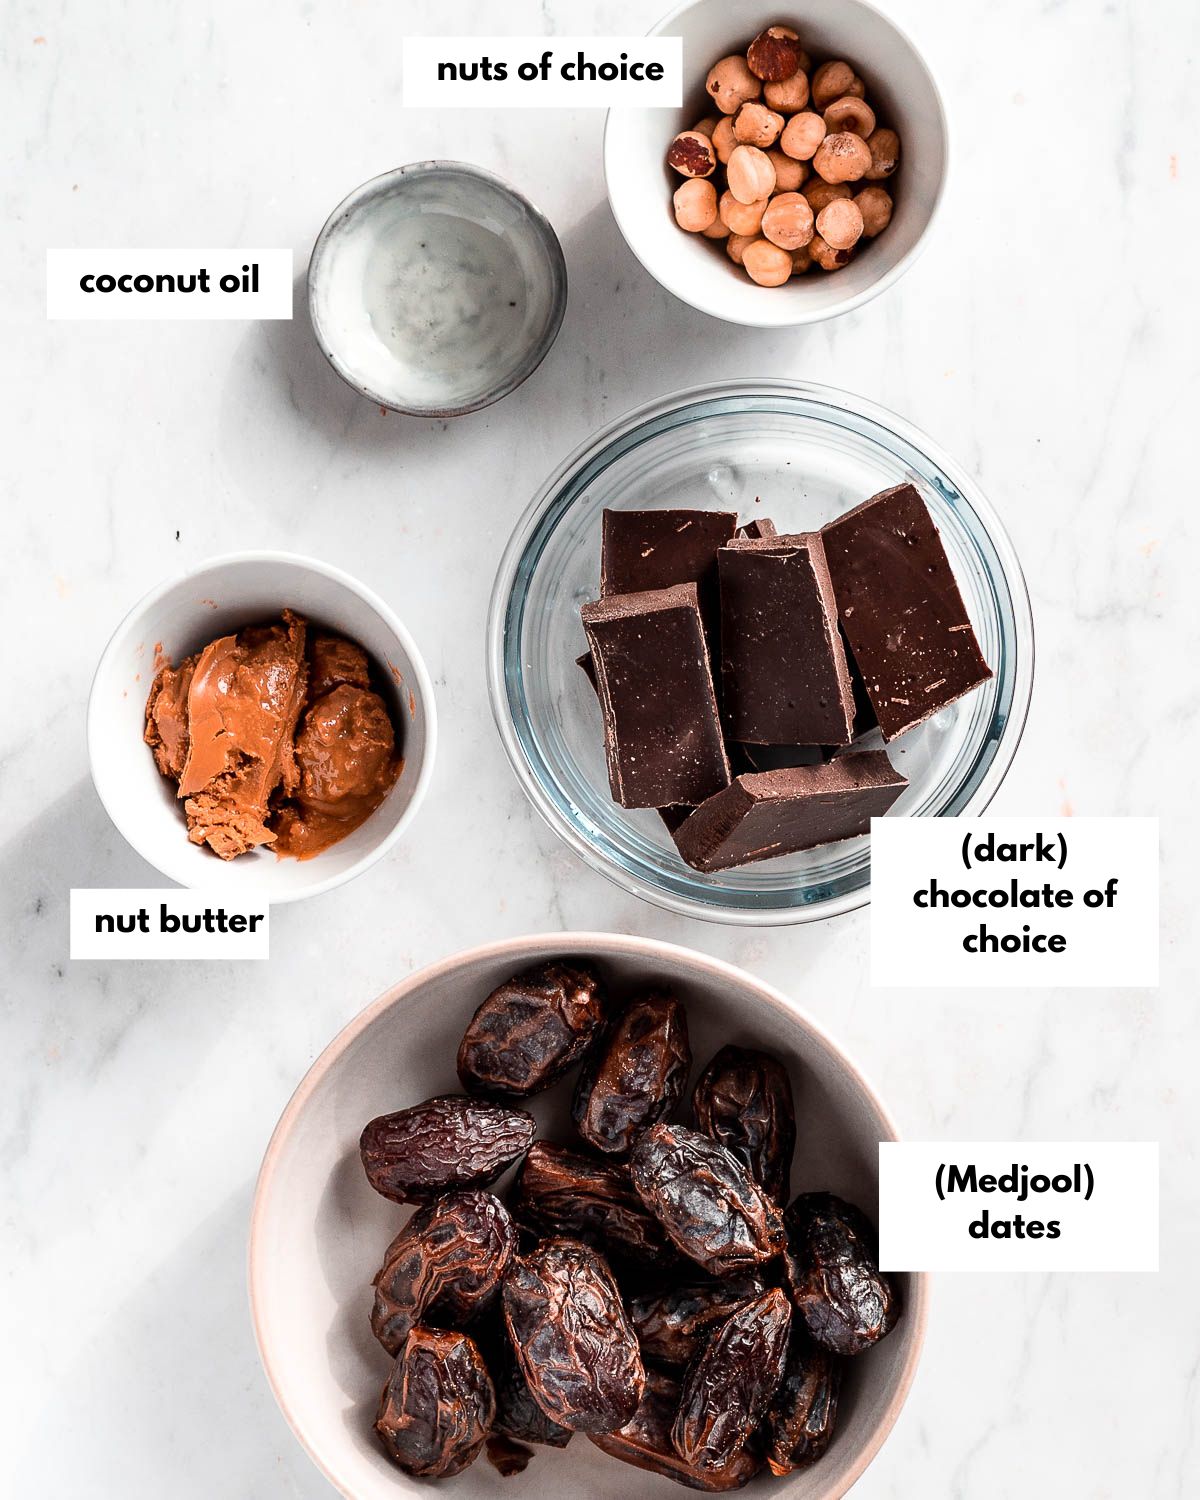 all ingredients needed for chocolate dates.